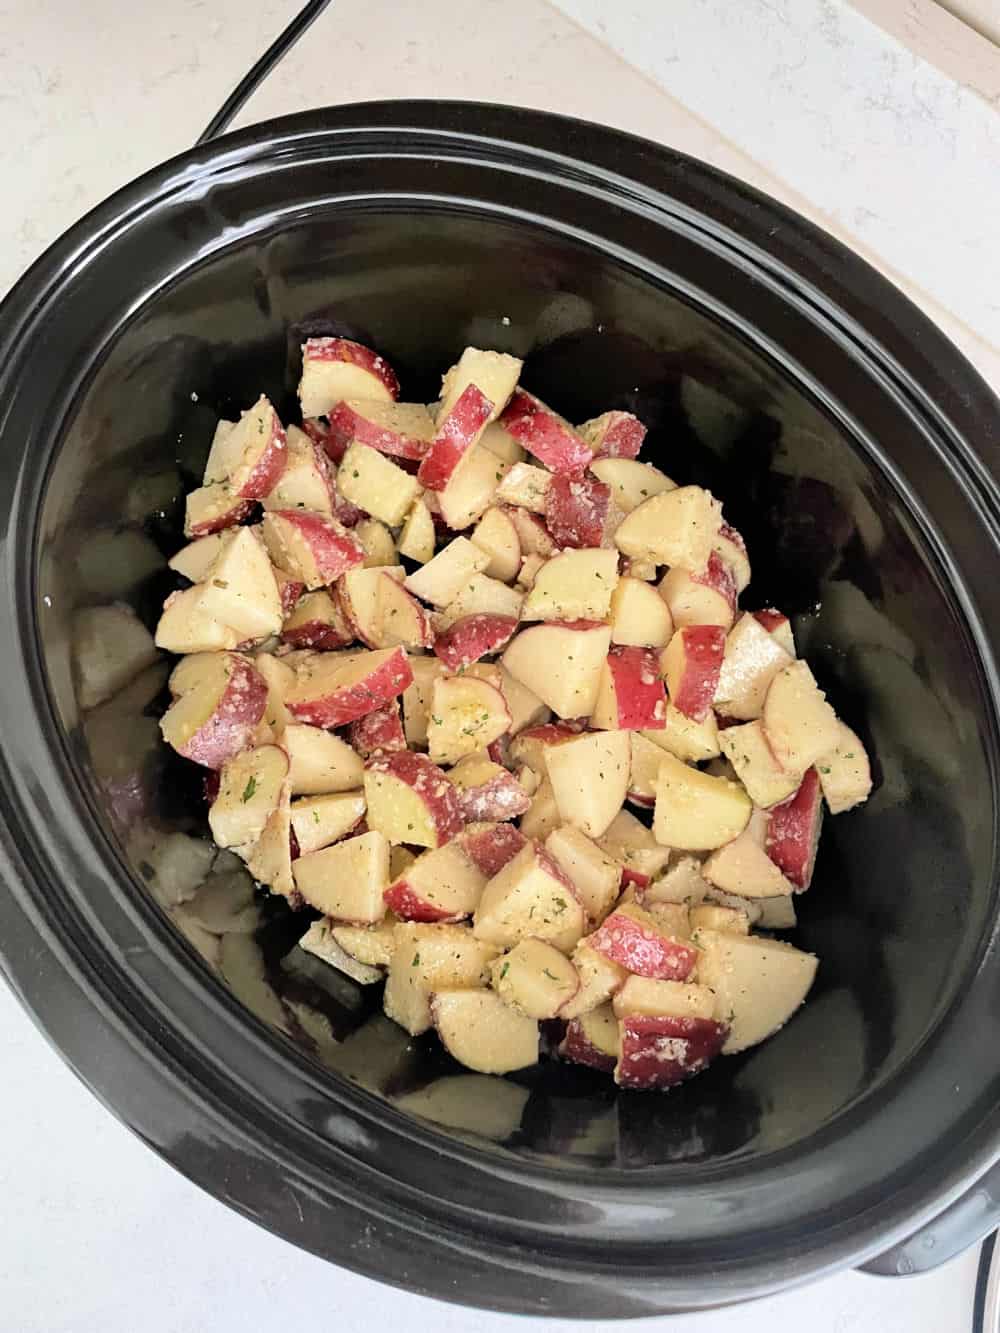 https://www.sixsistersstuff.com/wp-content/uploads/2021/10/potatoes-ready-to-cook-in-the-slow-cooker.jpg